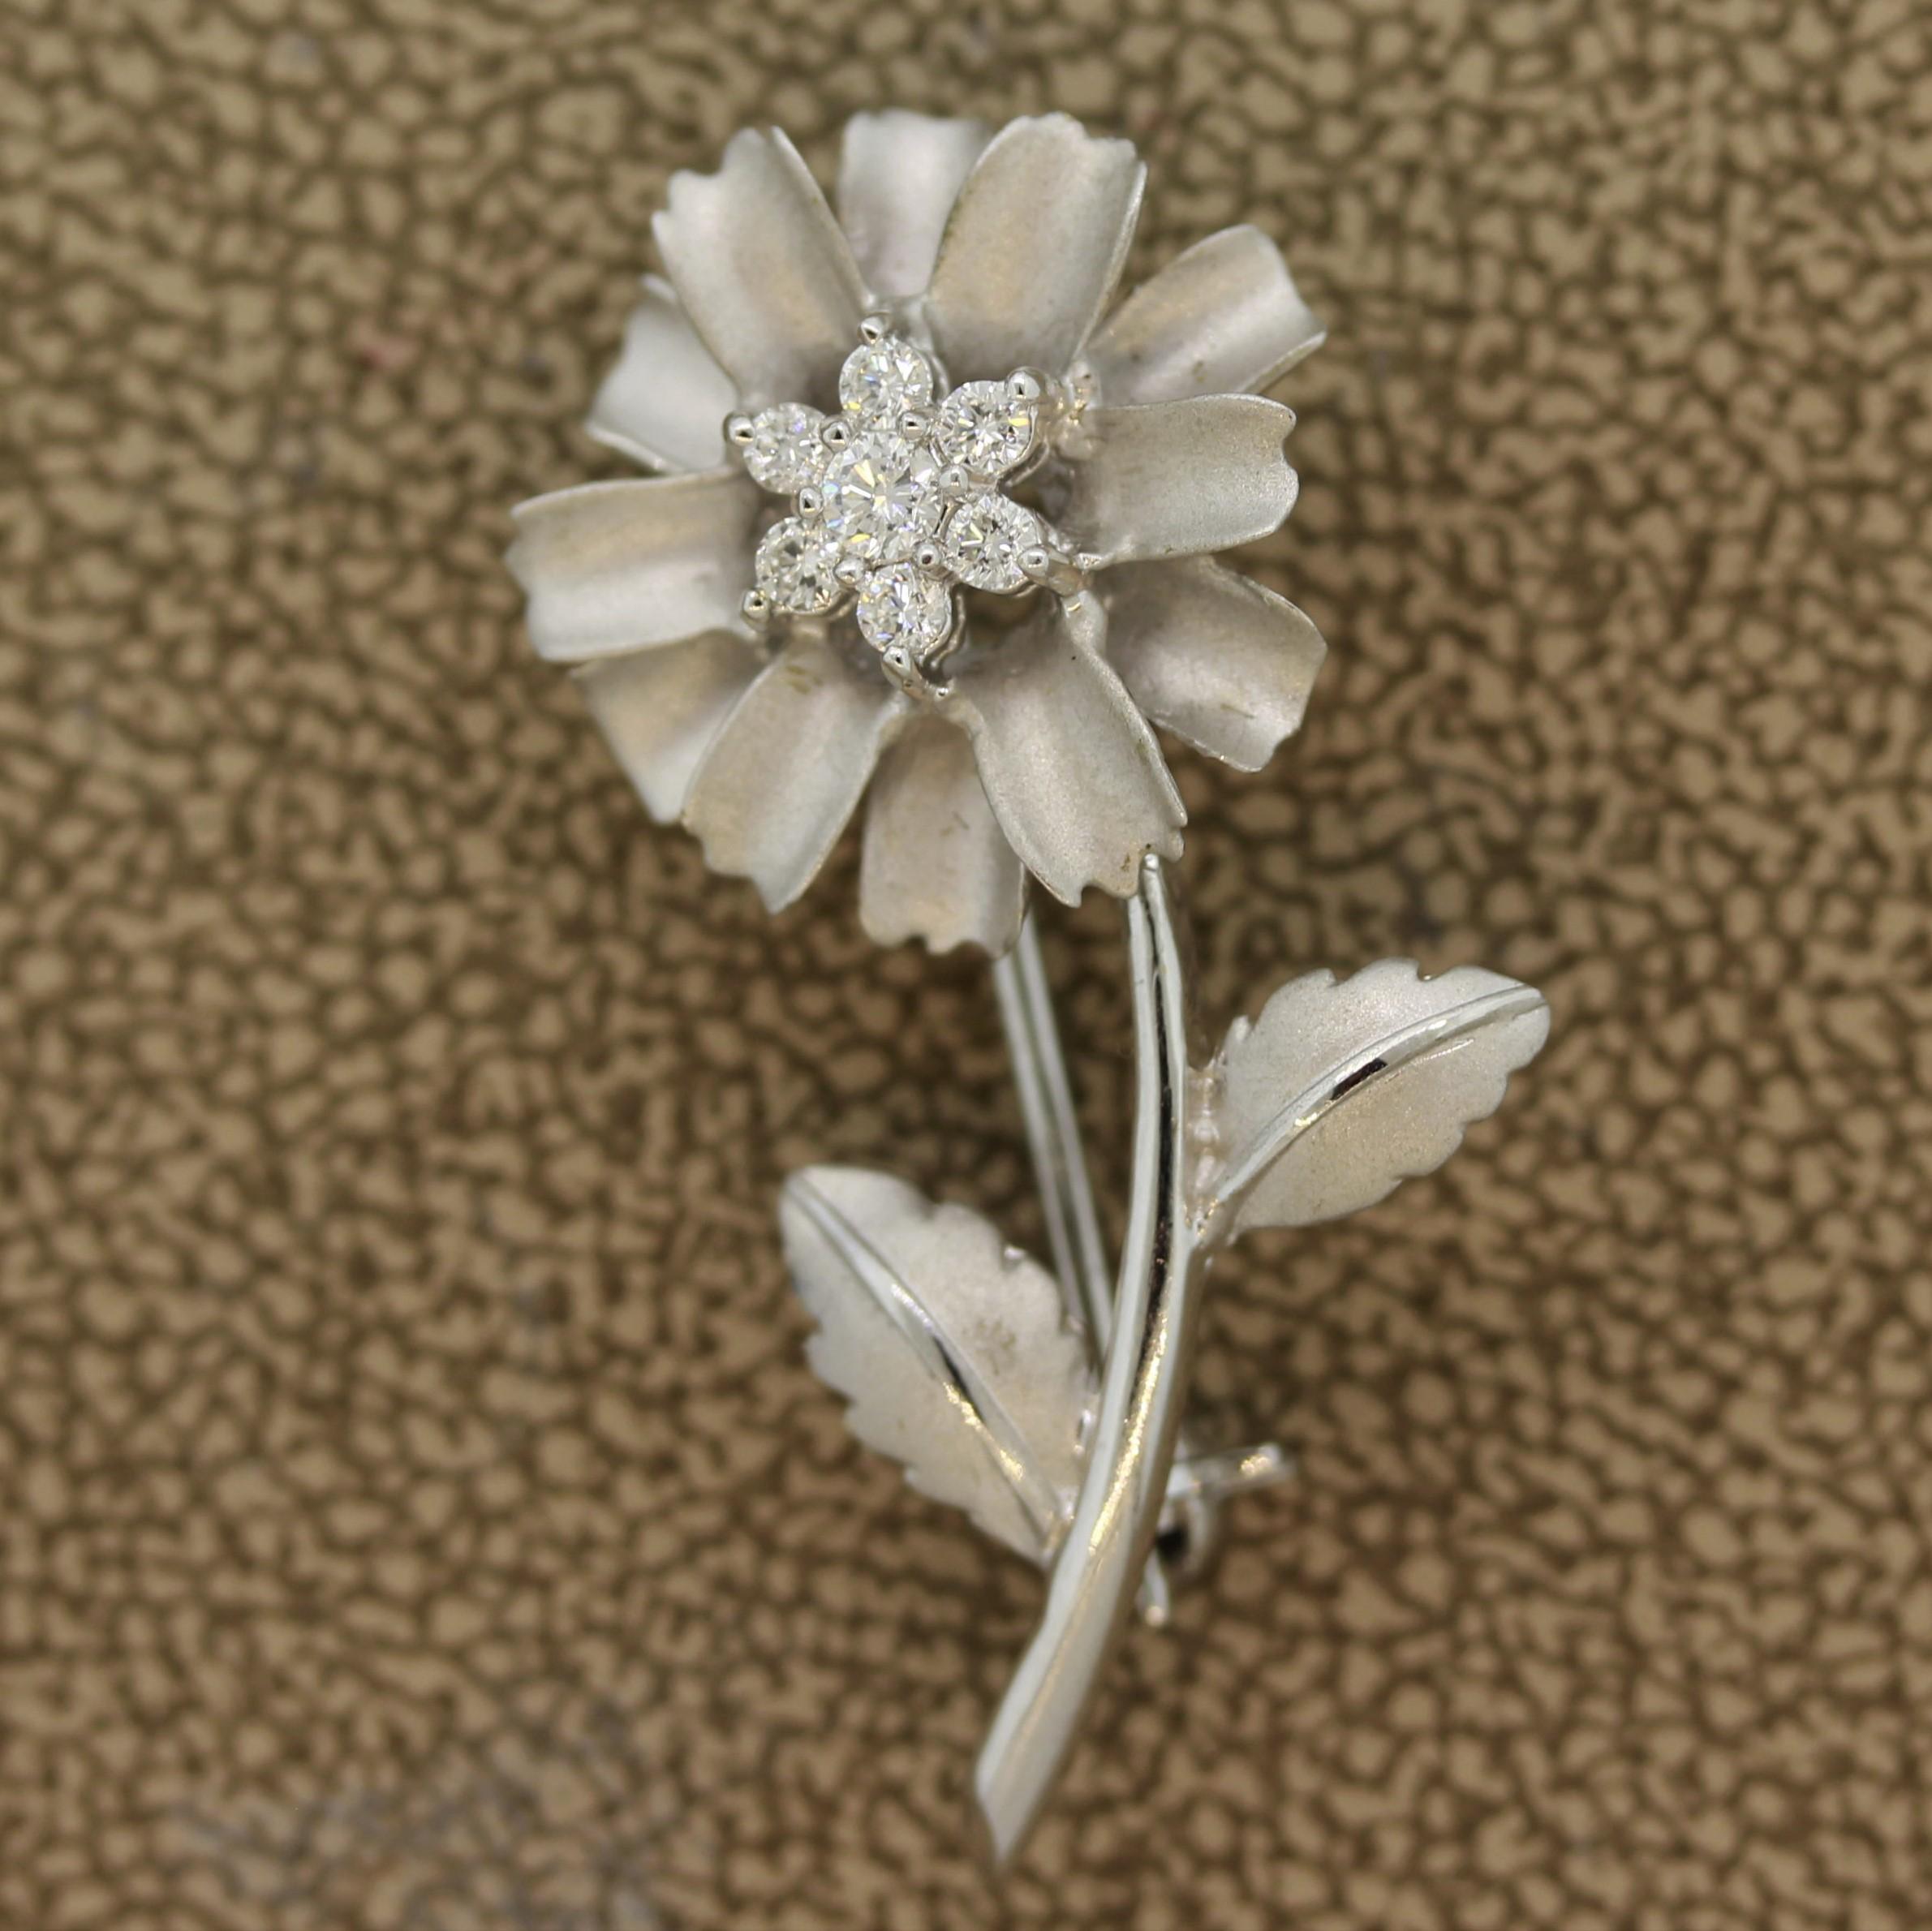 A cute and wearable gold flower pin. It features 7 round brilliant cut weighing a total of 0.25 carats. Set in 18k white gold, easy to wear with any outfit.

Length: 1.25 inches